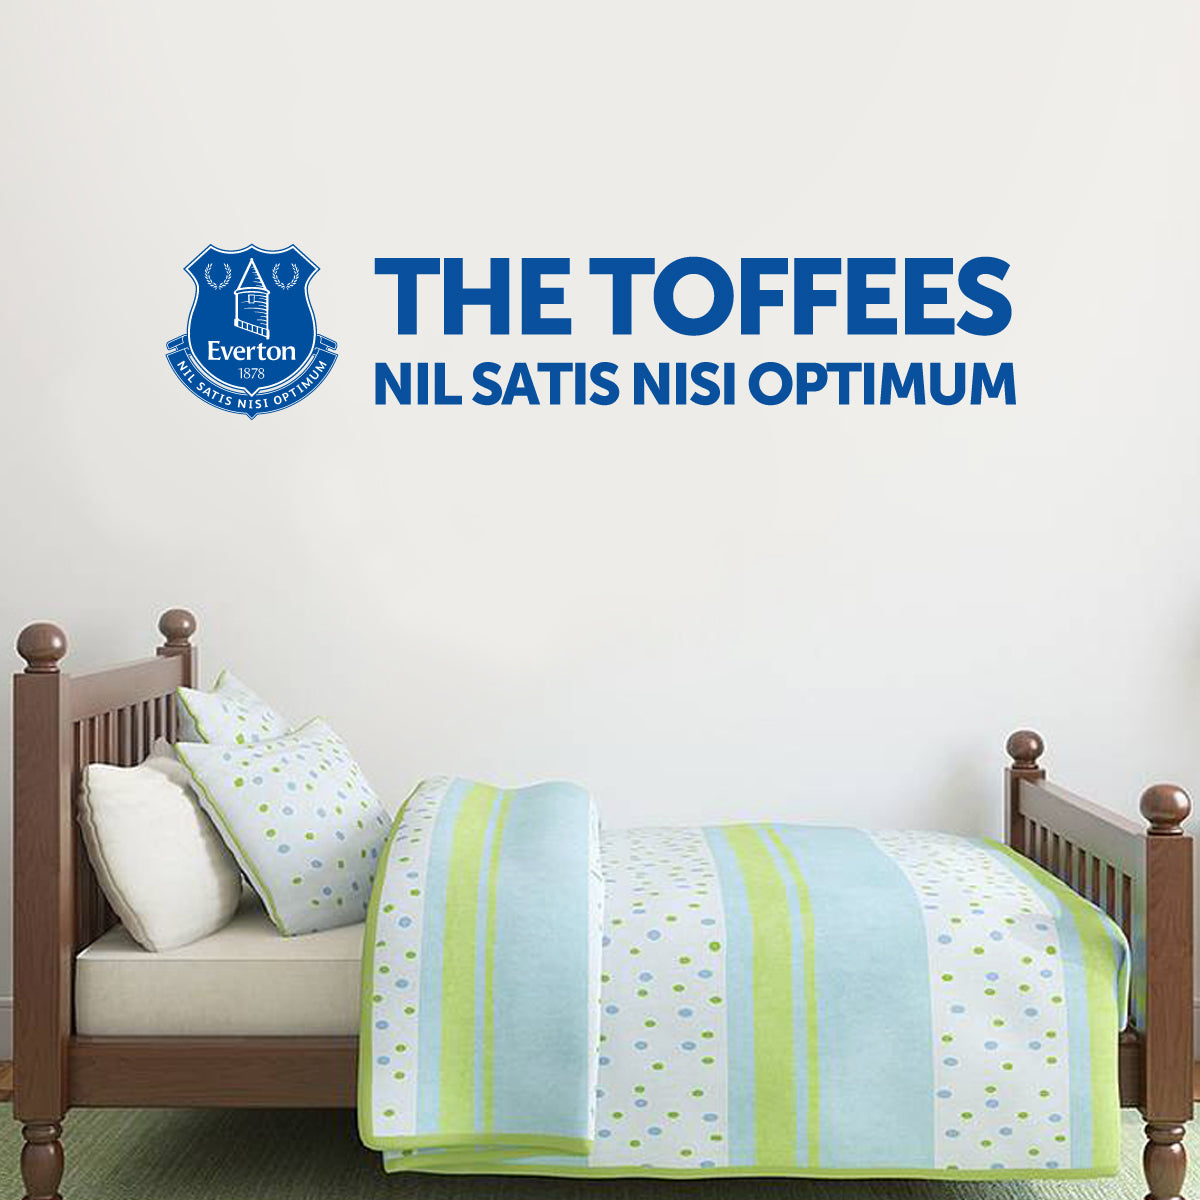 Everton Football Club - 'The Toffees' & Crest Wall Sticker